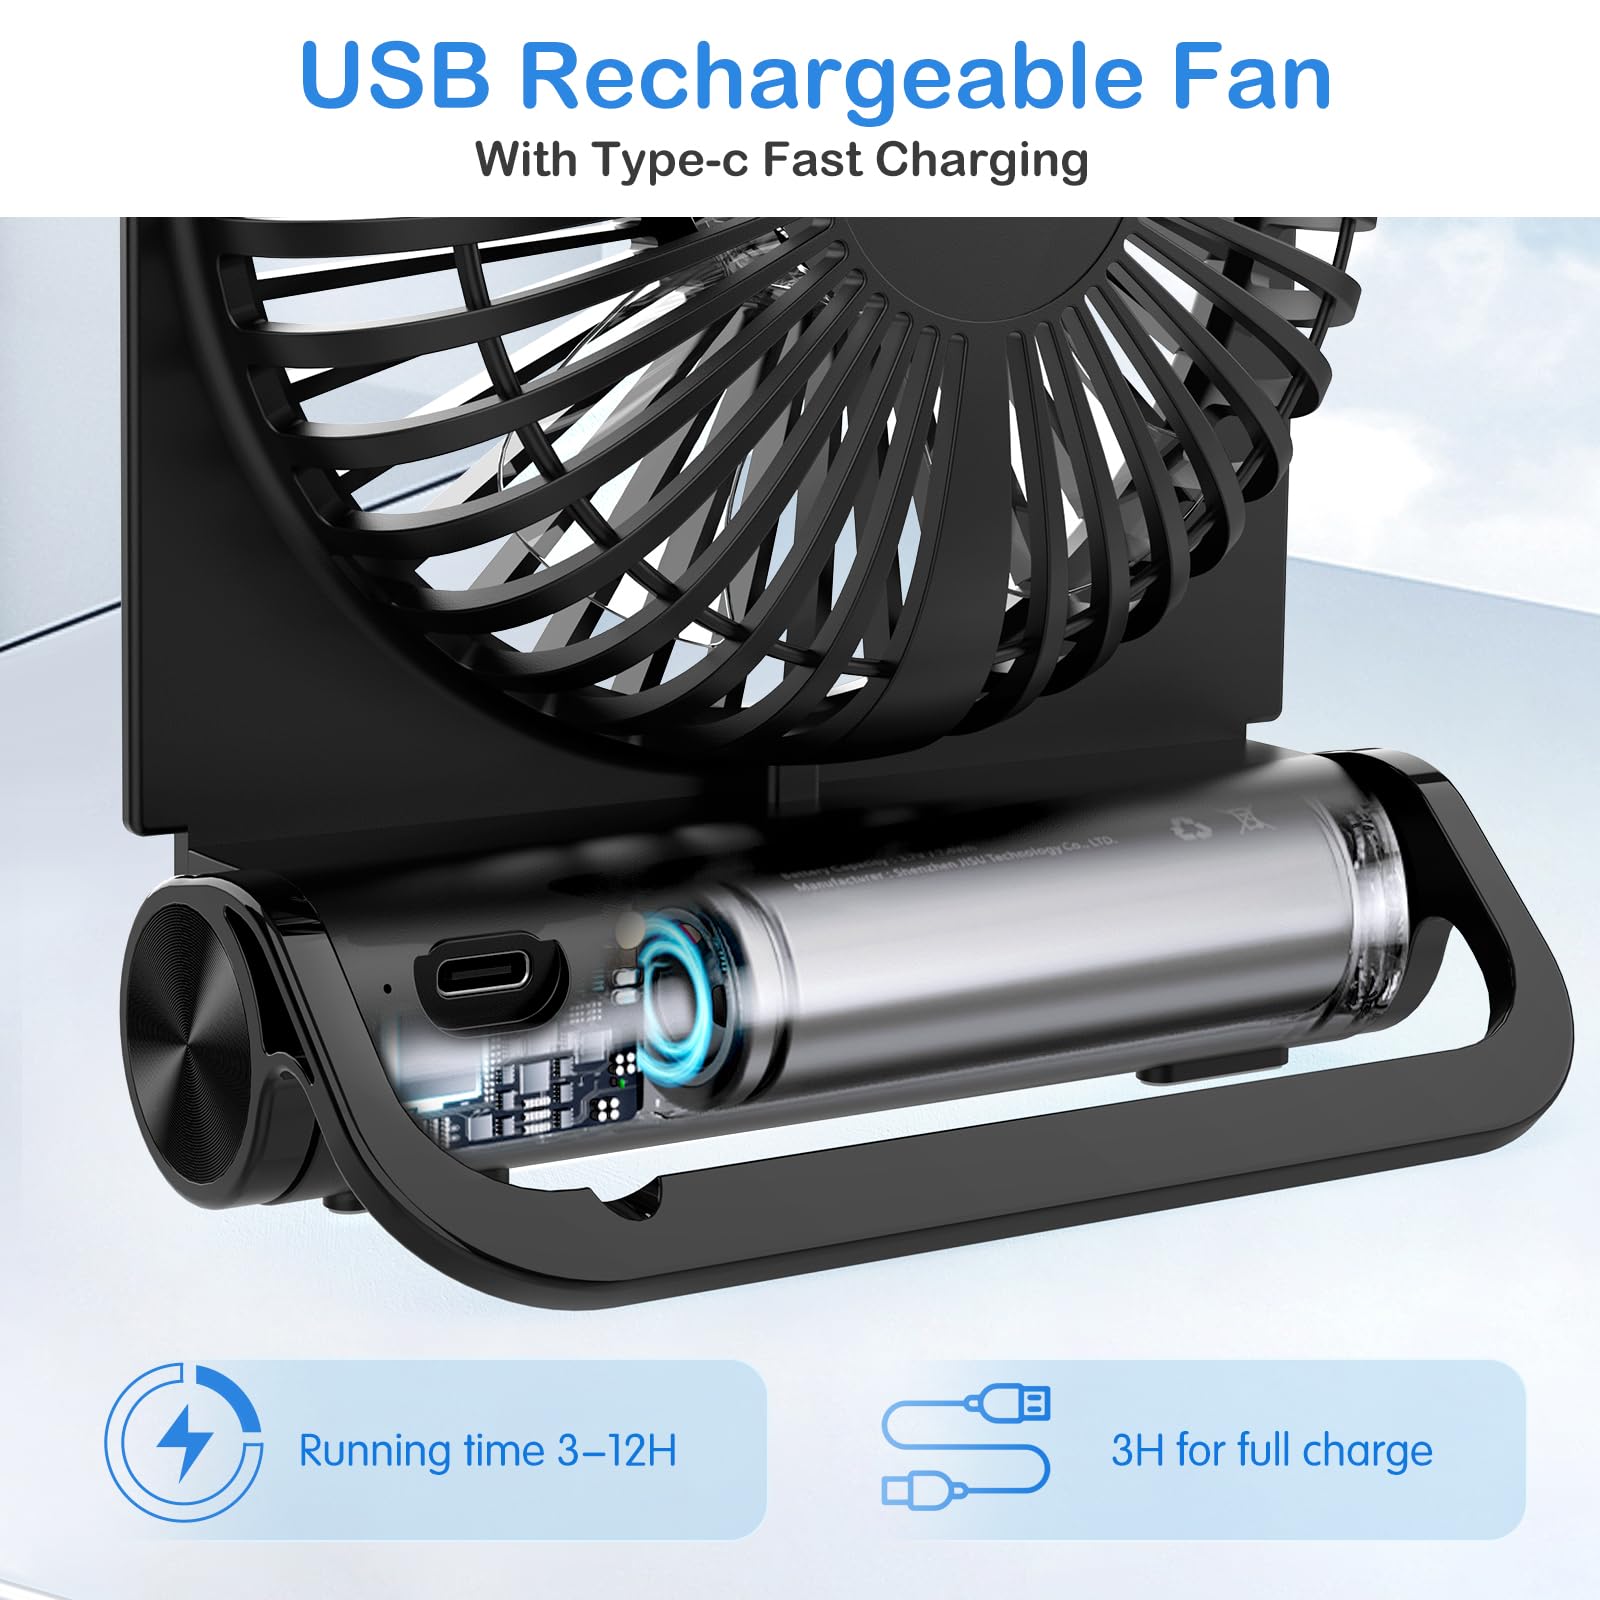 EasyAcc Small Powerful Desk Fan, 2000 Rechargeable Battery Powered Fan - Fully Foldable, Strong Wind, 4 Speeds - USB C Fan for Home, Travel, Cruise, Sporting Events, Hot Flashes - Gifts for Men Women